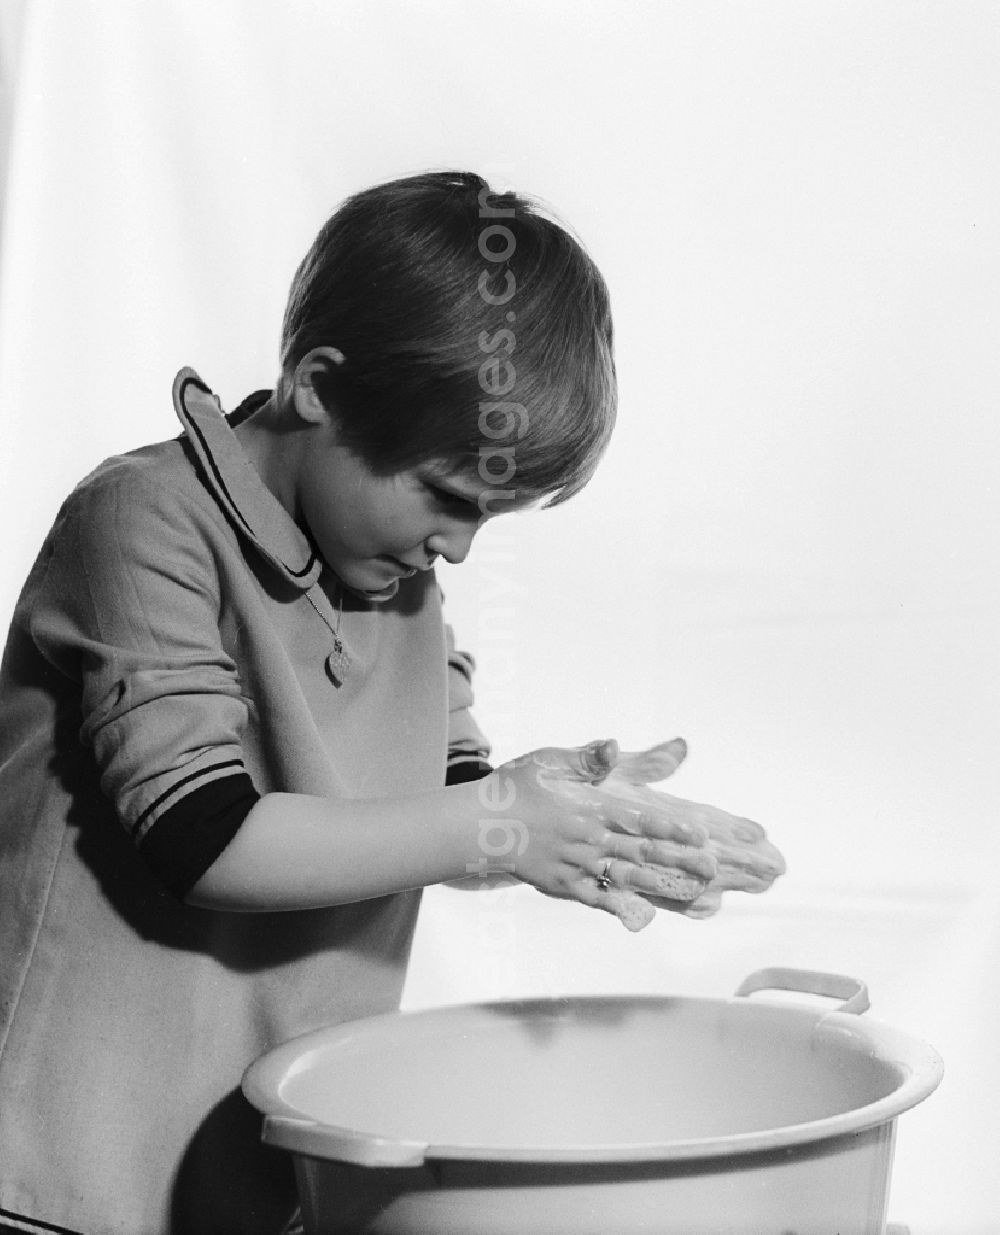 GDR picture archive: Berlin - Small girl washing hands over a plastic bowl in Berlin